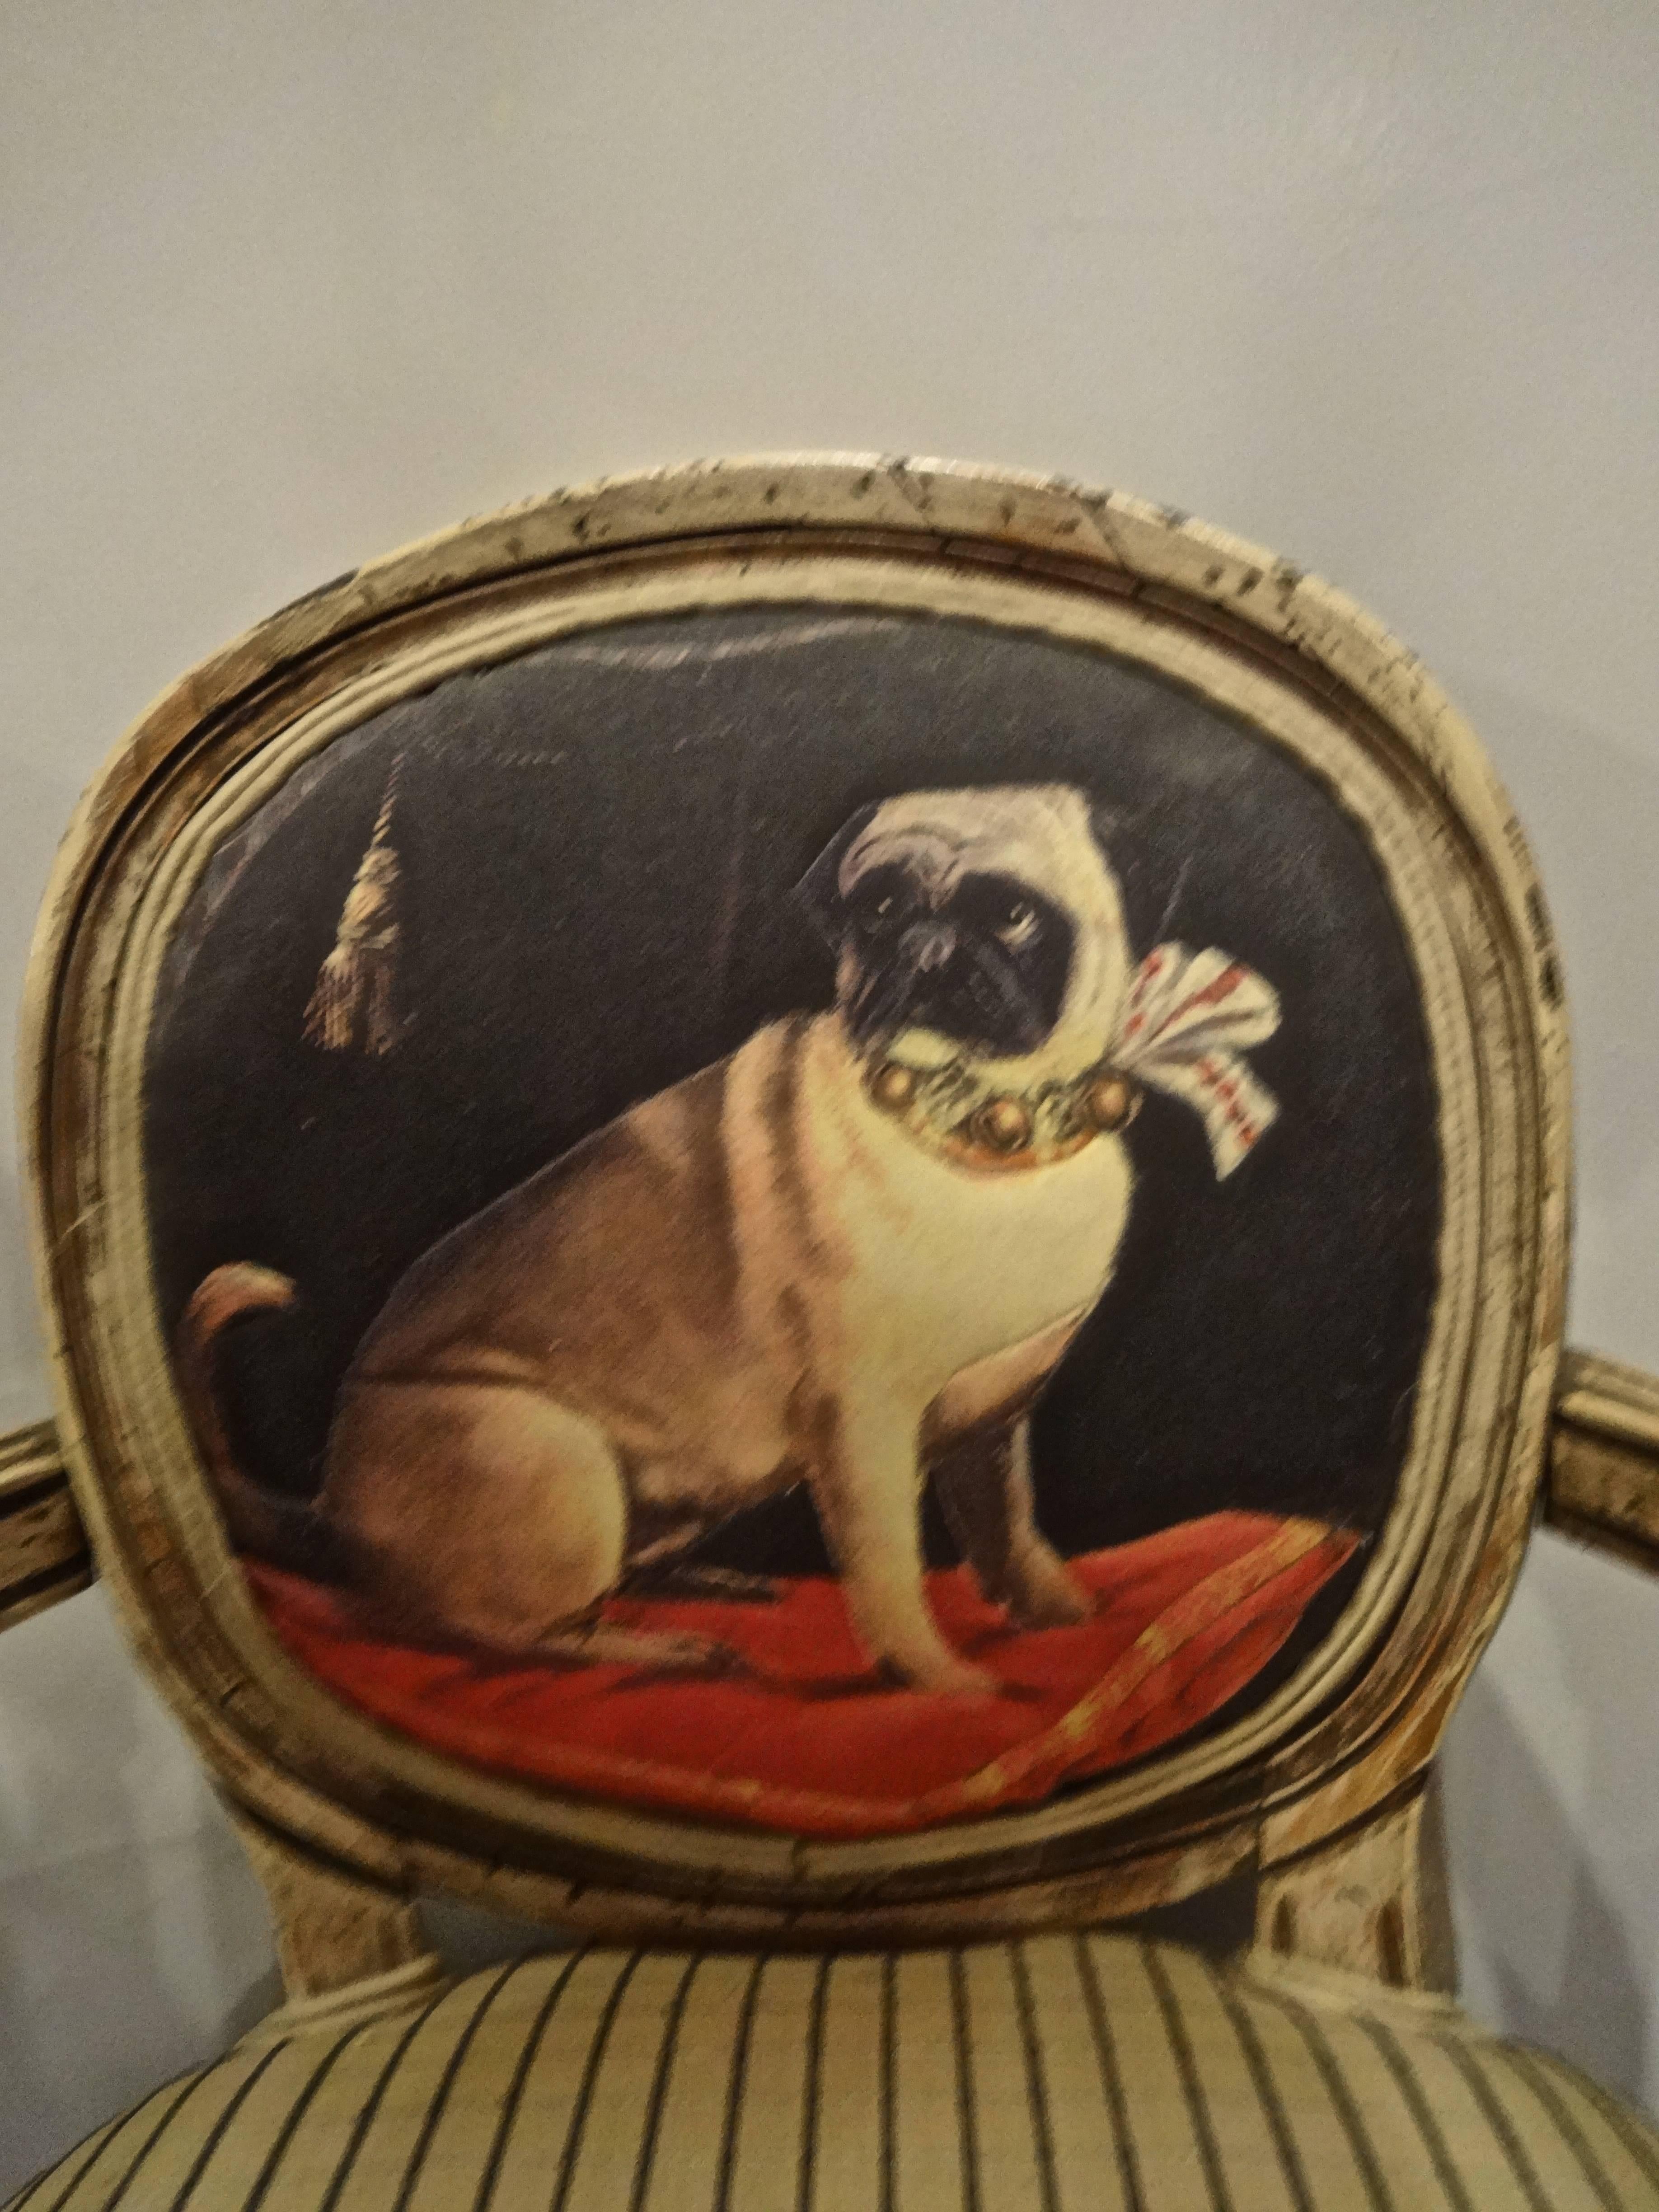 A small French Louis XVI style painted wood child's chair. The inside chair back is upholstered in an adorable printed cotton fabric depicting a pug dog seated on a red velvet cushion with a collar of bells and a plaid bow. Seat, armrests and back